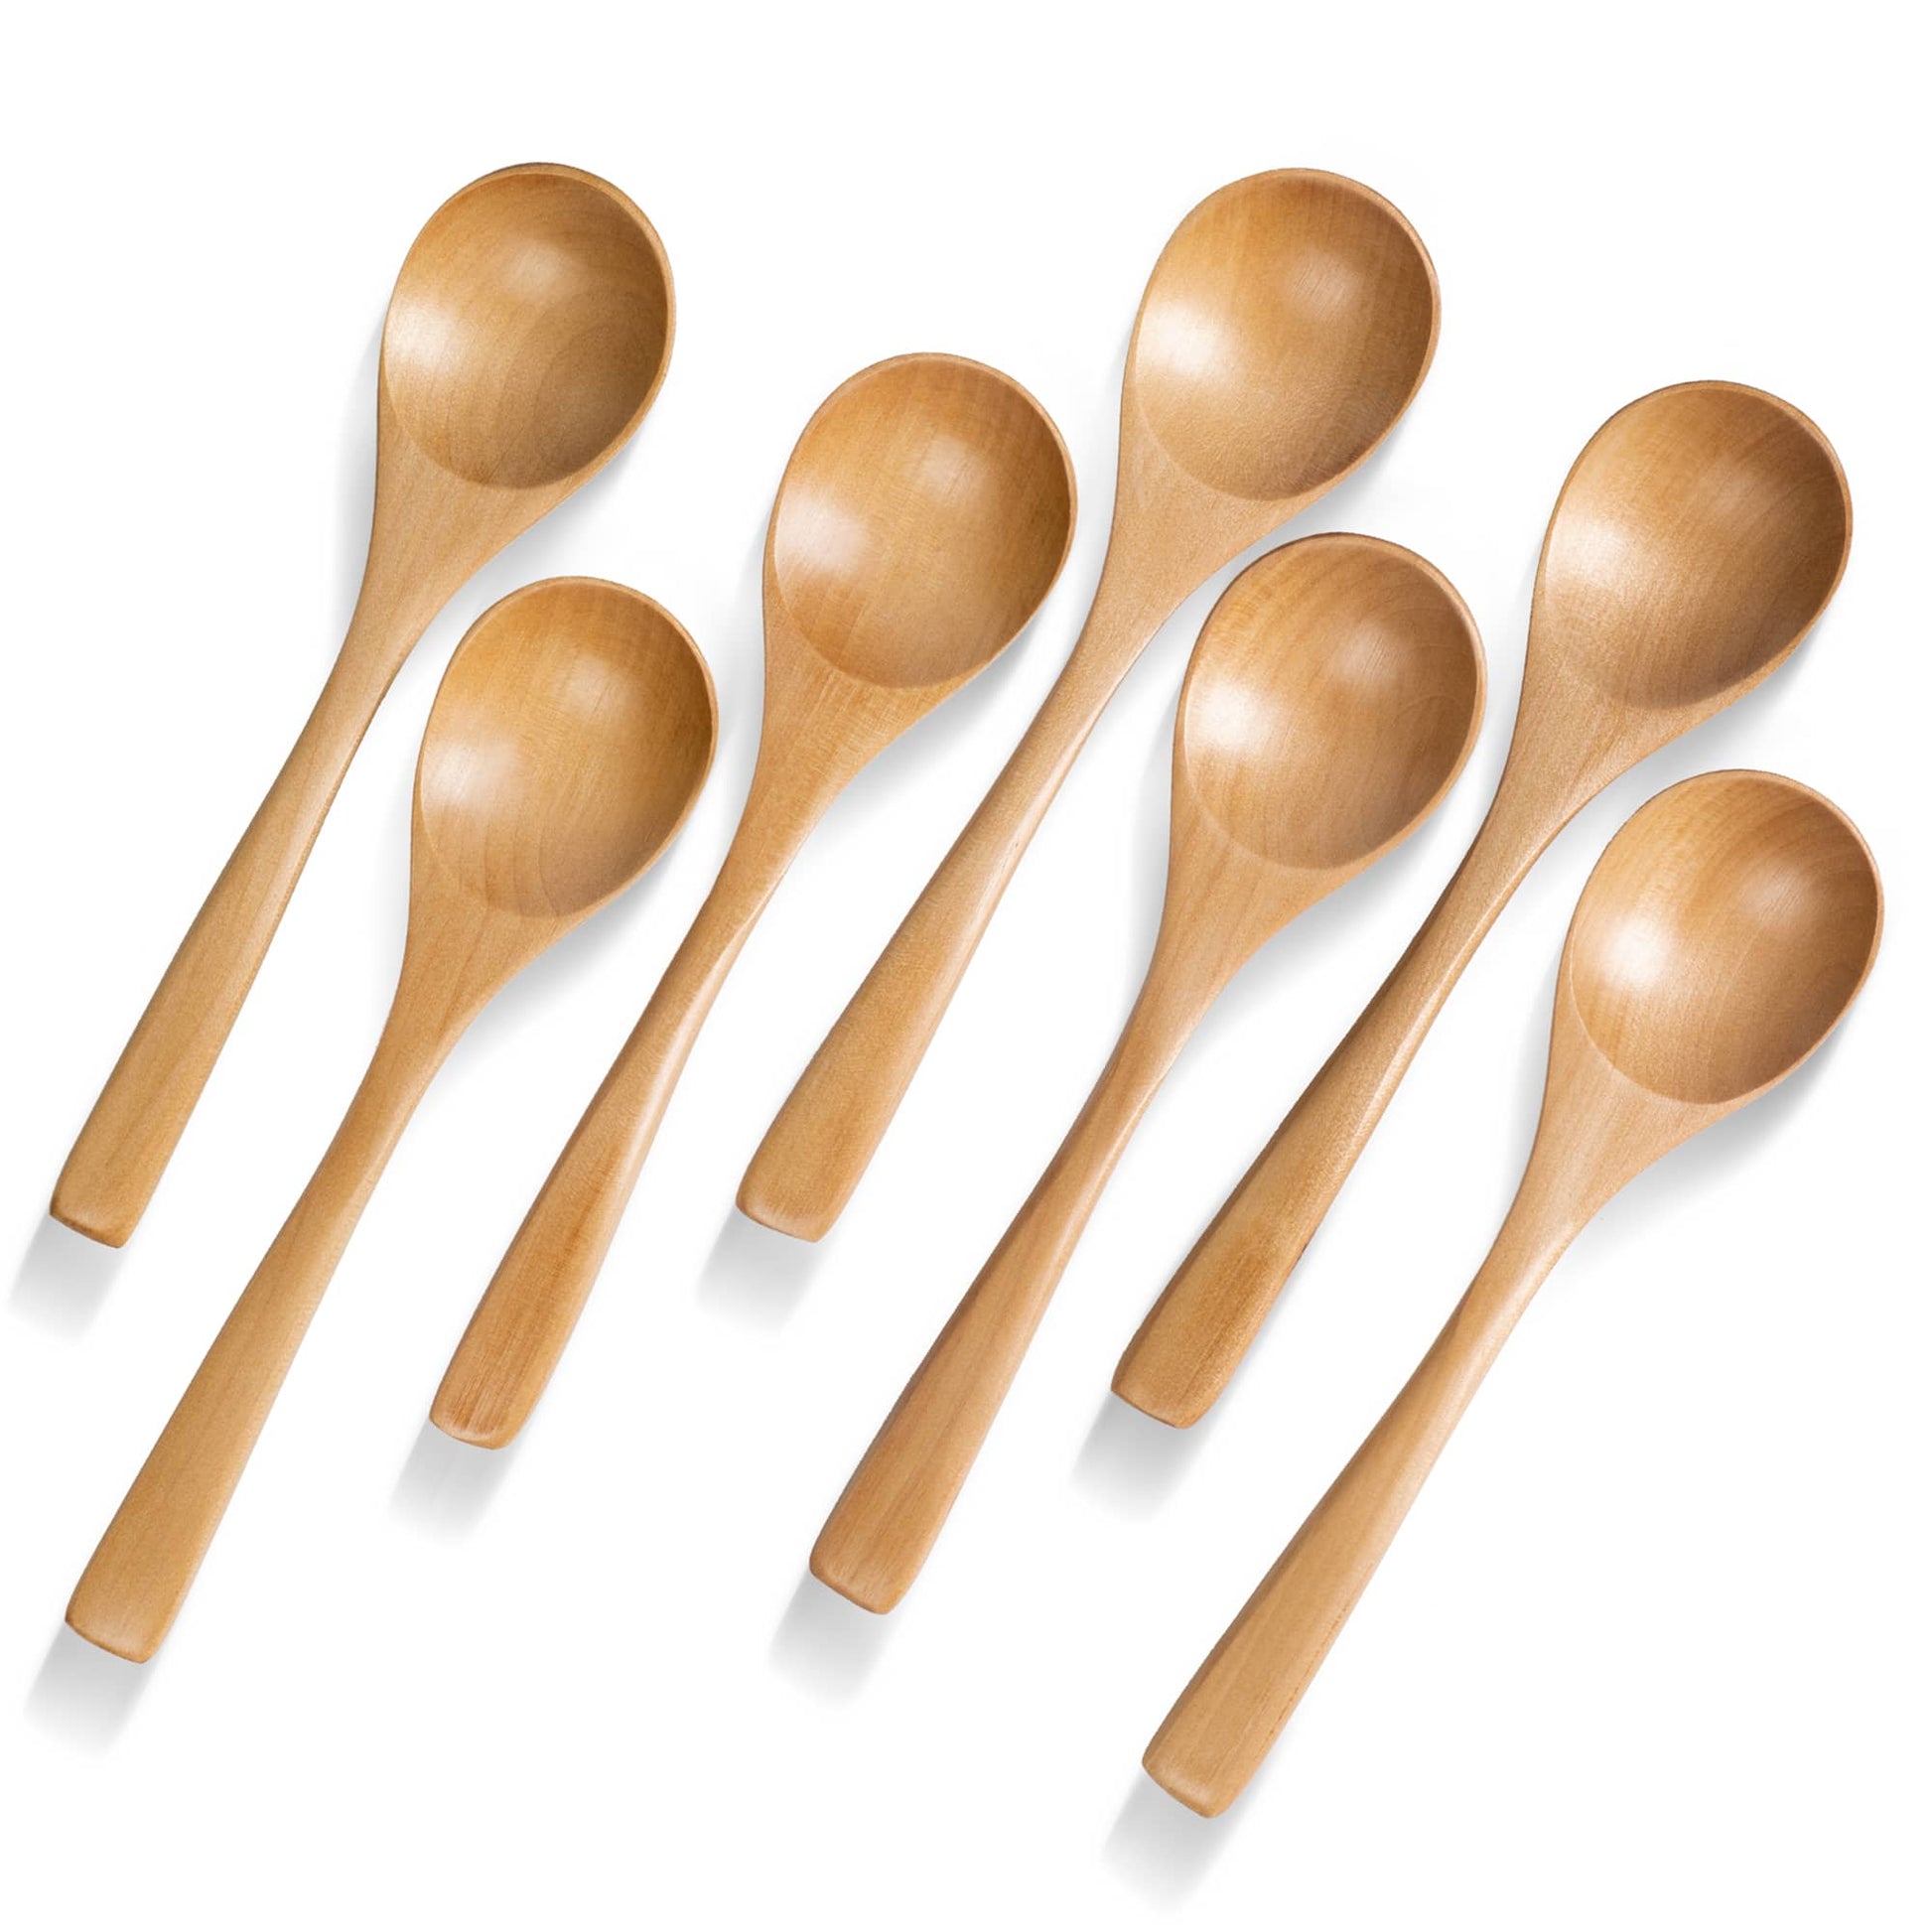 7 pcs 7 Inch Eating Spreading Jam for Kids and Adults Harvest Woods Small Natural Pure Wooden Spoon 